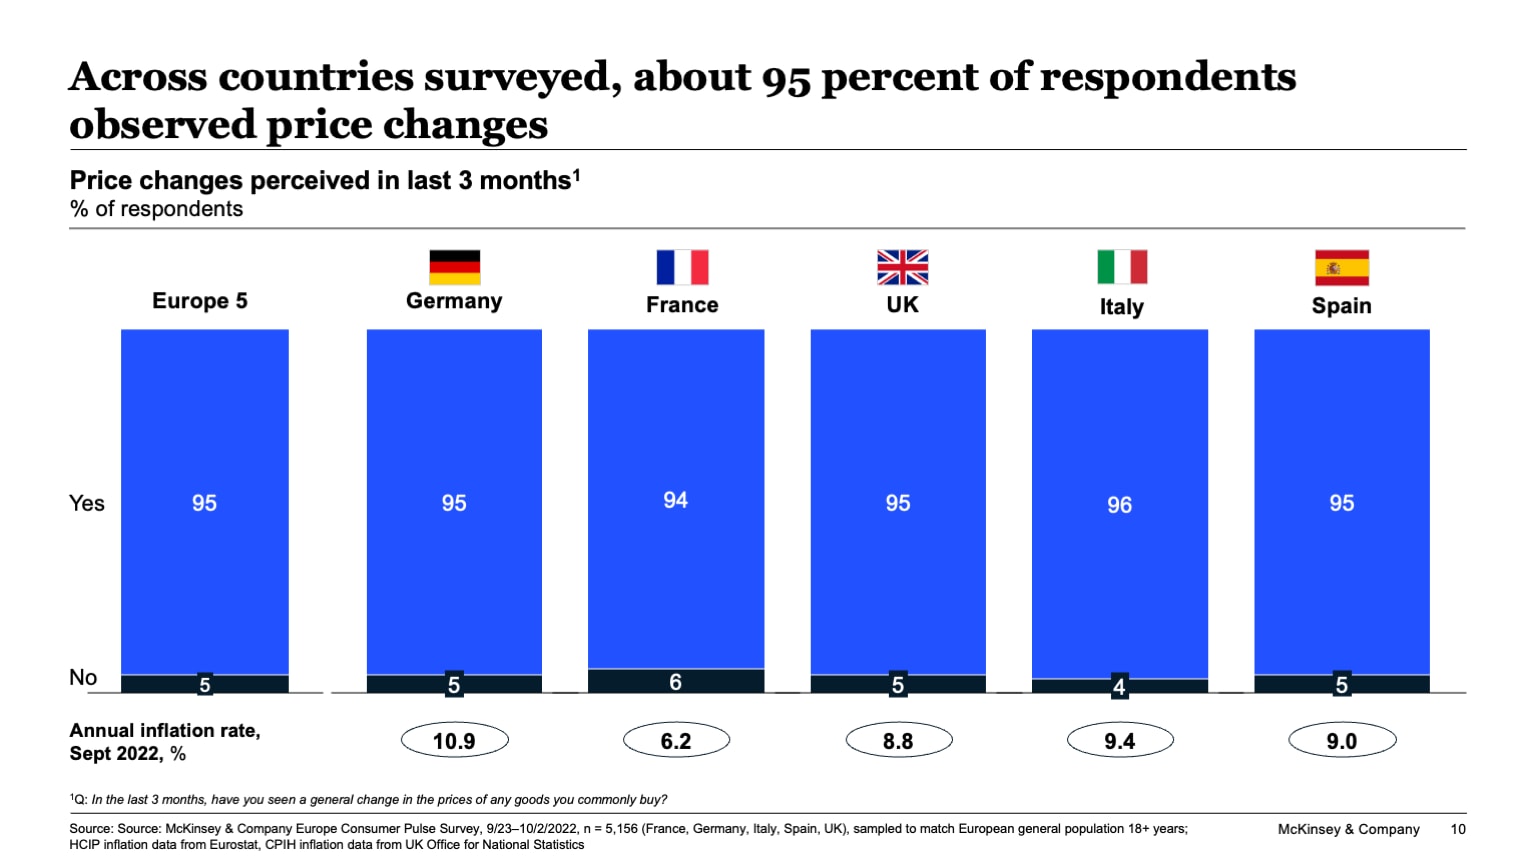 Across countries surveyed, about 95 percent of respondents observed price changes